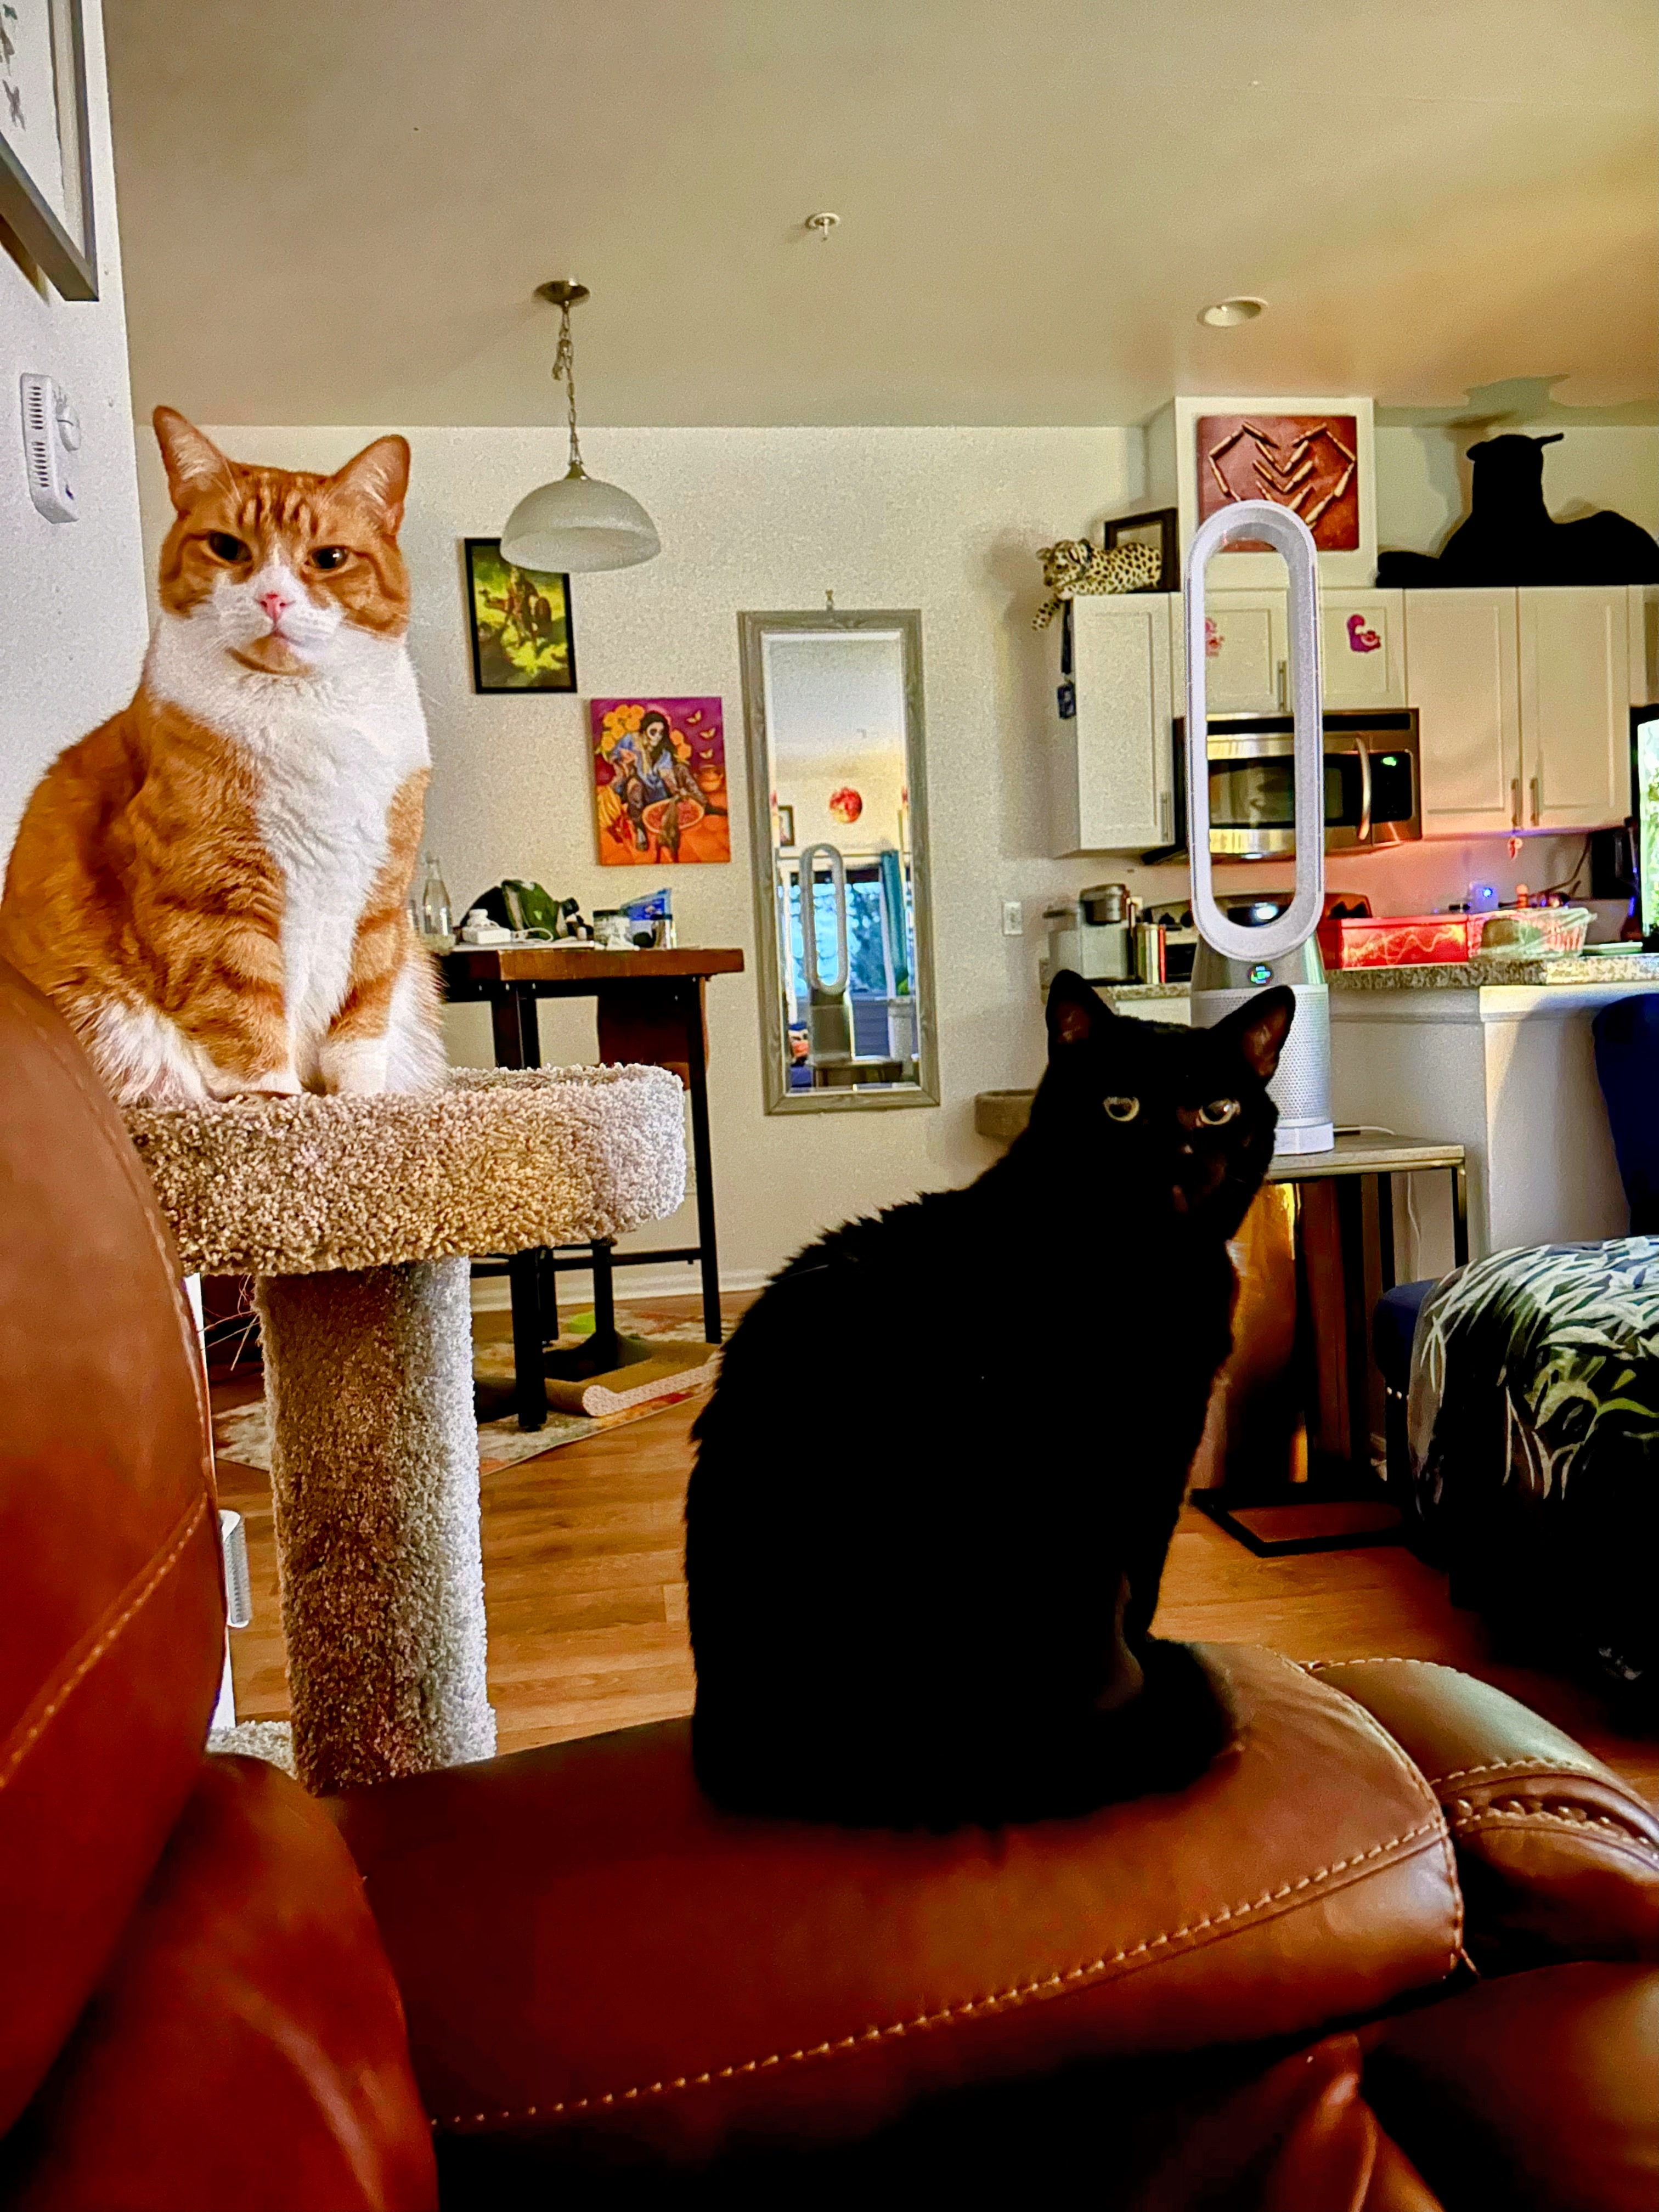 a picture of Dr. Muerte (black), and Tigrito (Orange)  a cat that needs a foster home.